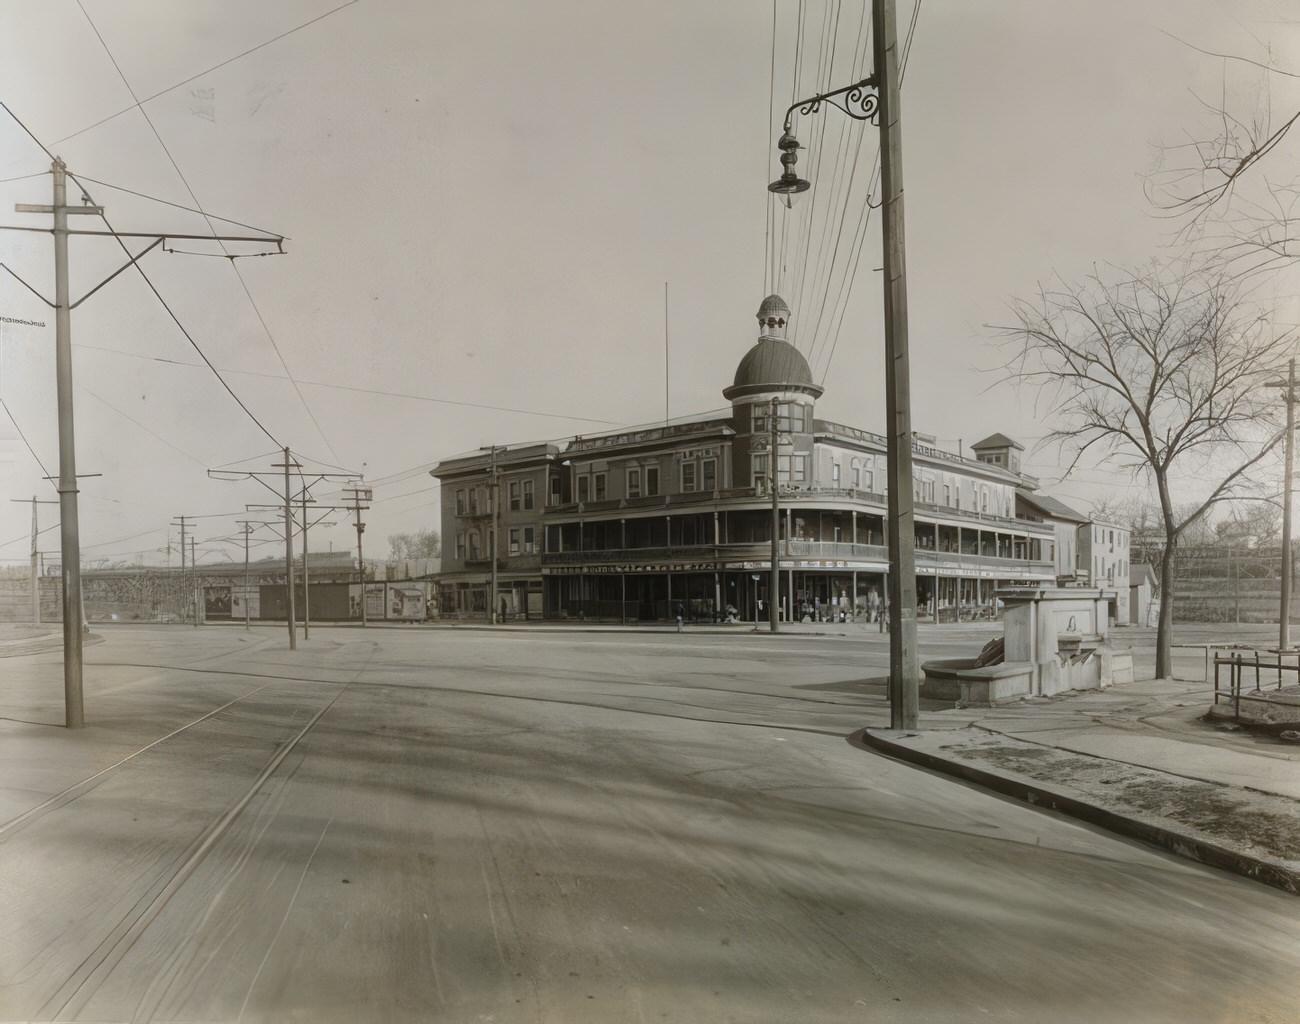 Huber Property Showing Subway Station And Site Of El Station, Circa 1910.